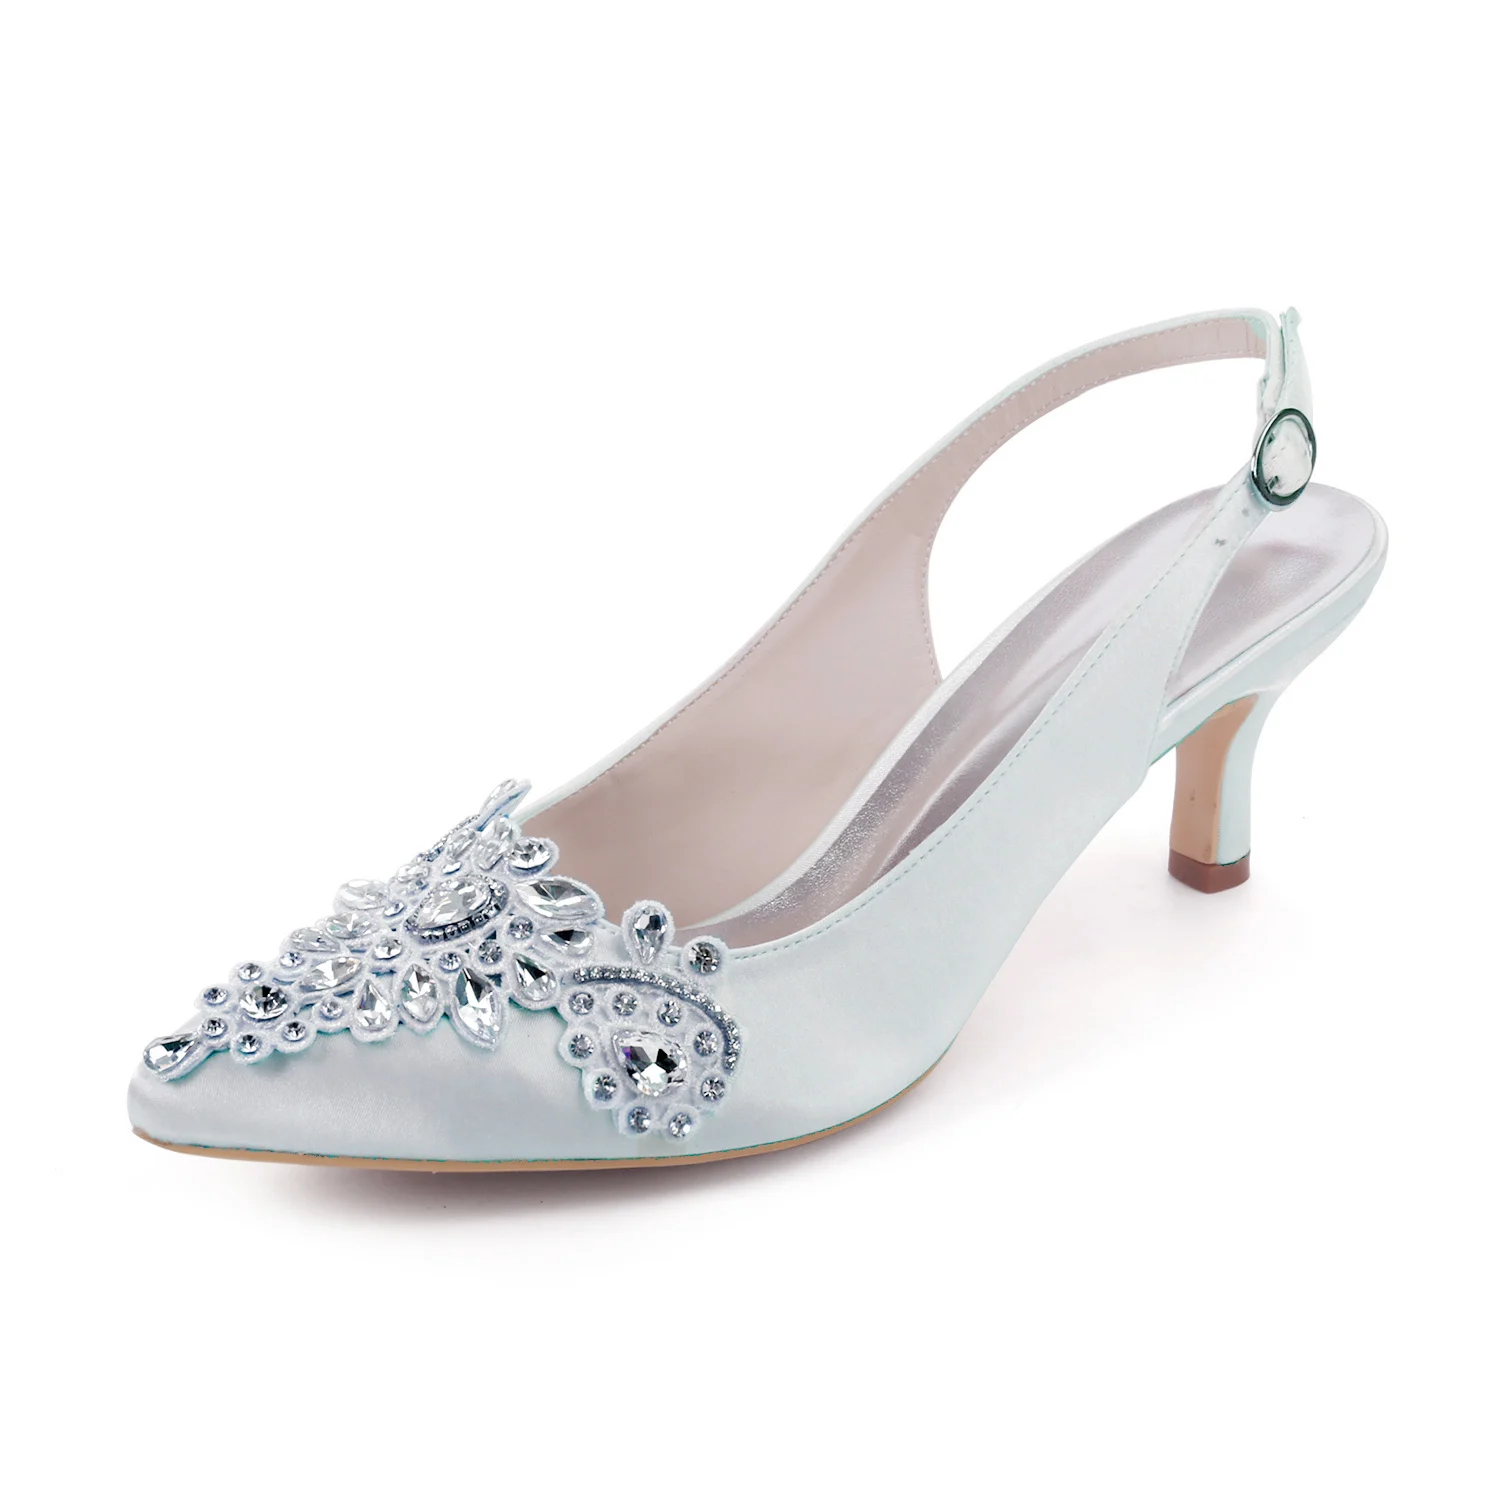 Small Heels Pointed Toe Bridal Pumps Wedding Party Slingback Lace Crystals